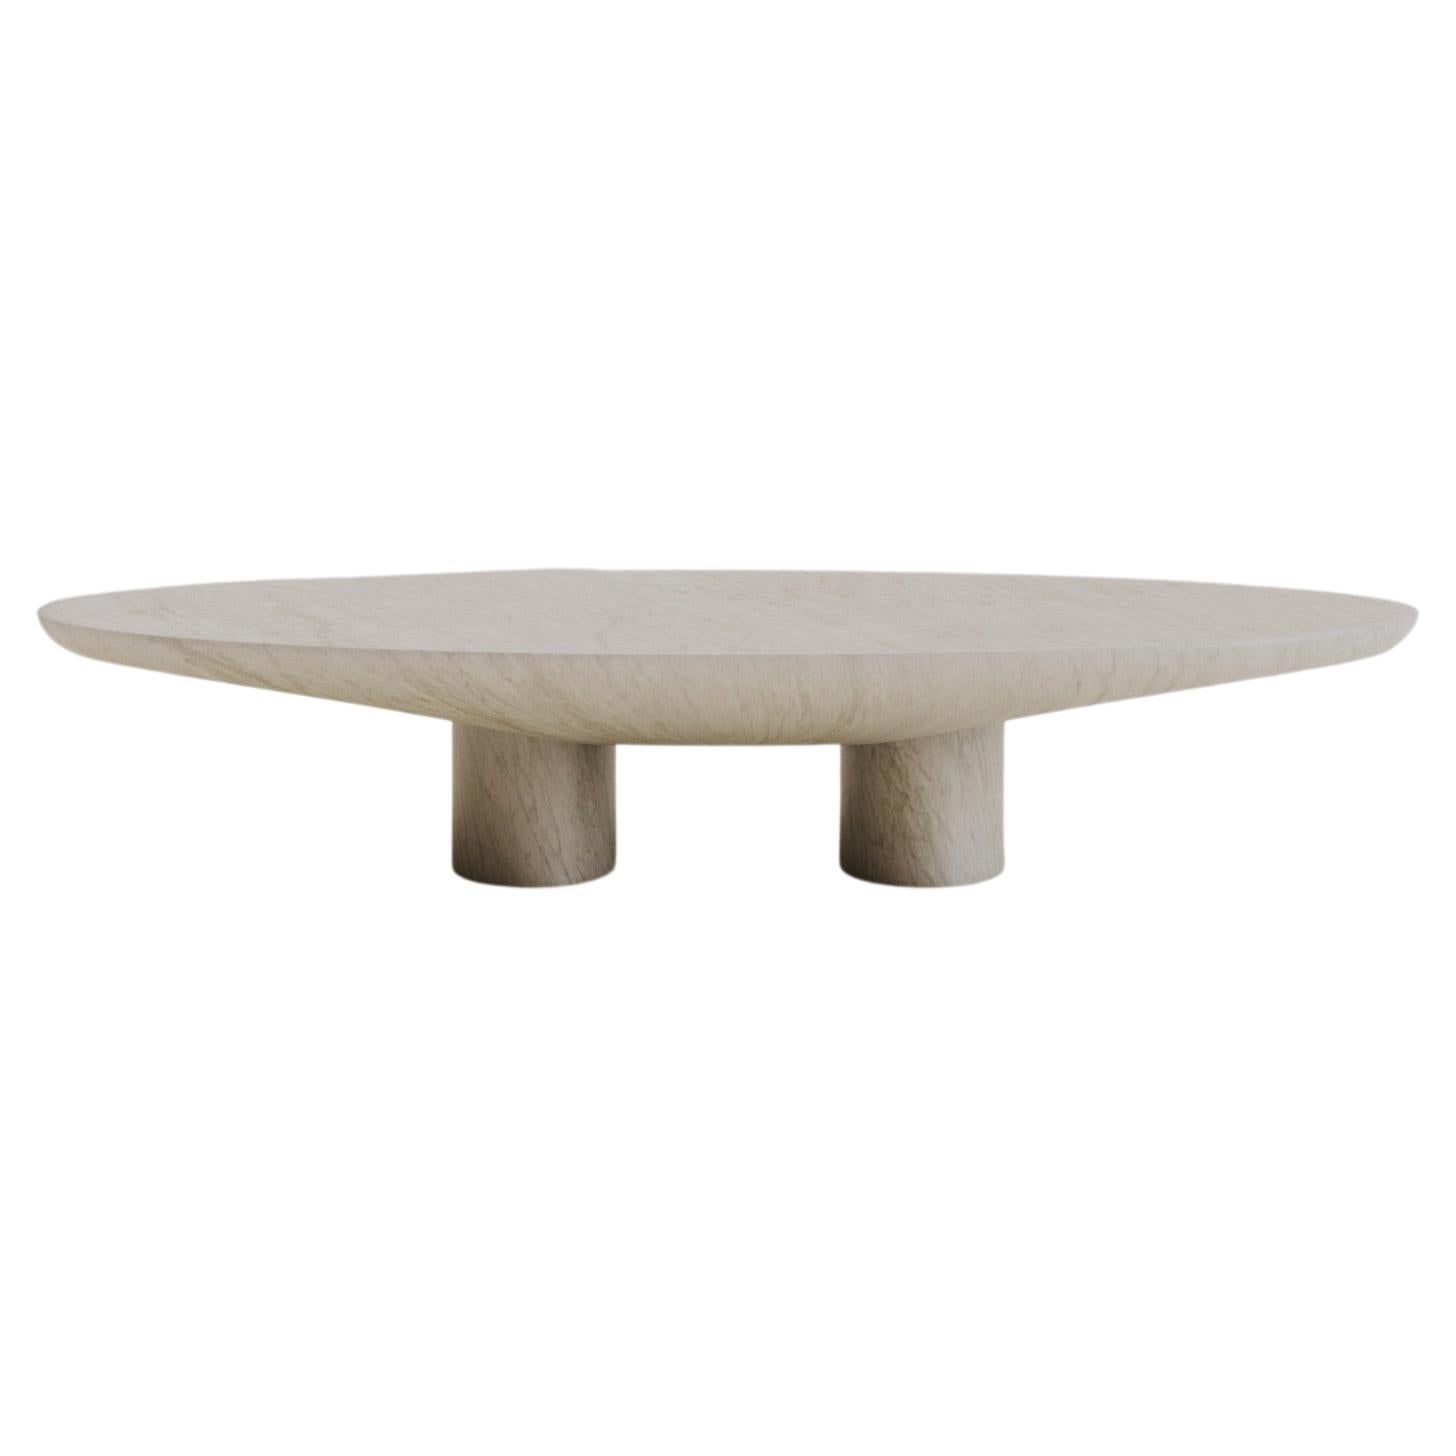 Solid White Marble Abraccio Oval Coffee Table 160 by Studio Narra For Sale